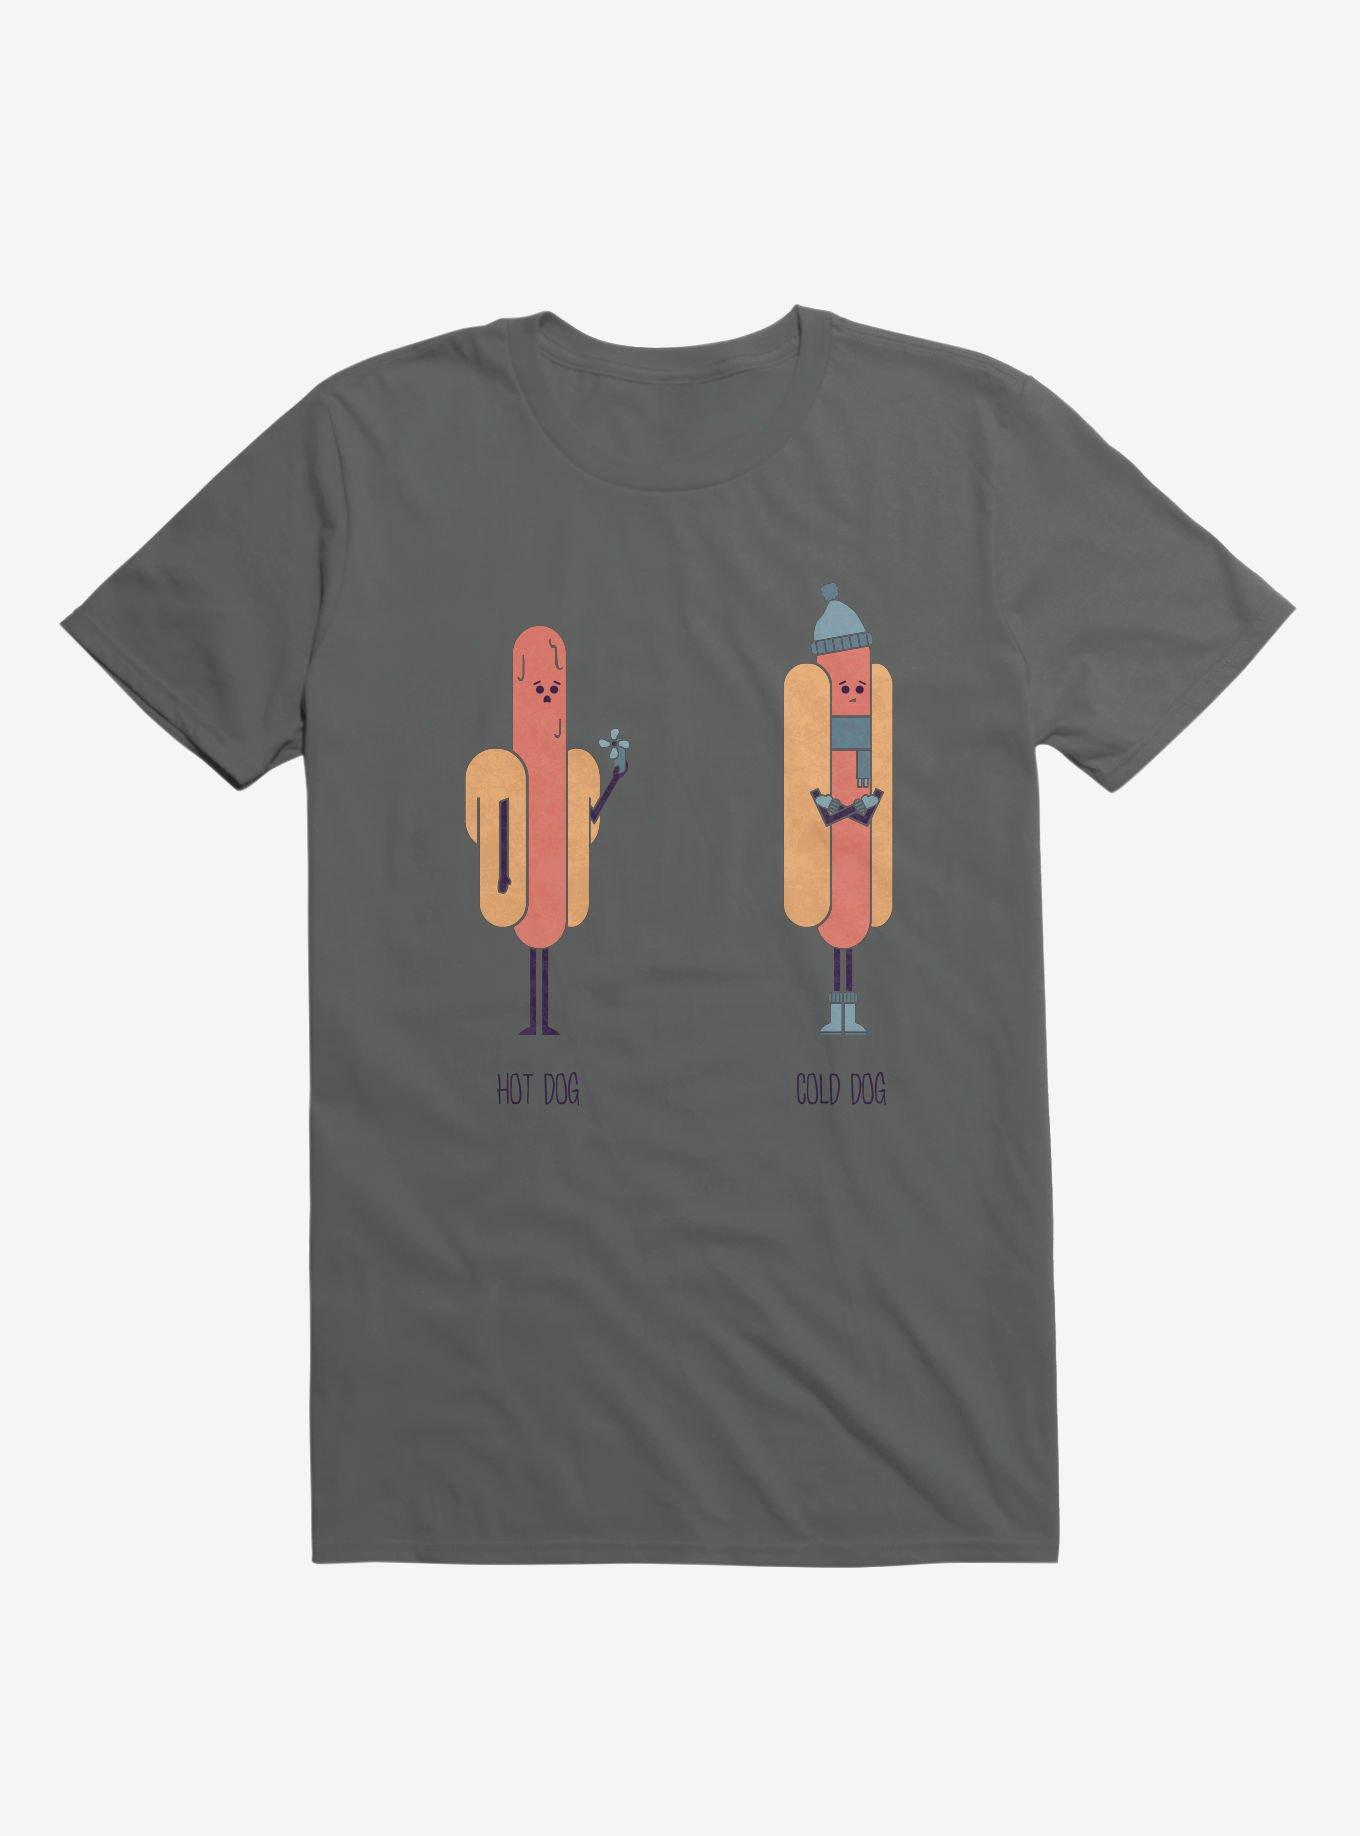 Opposites Hot Dog Cold Charcoal Grey T-Shirt